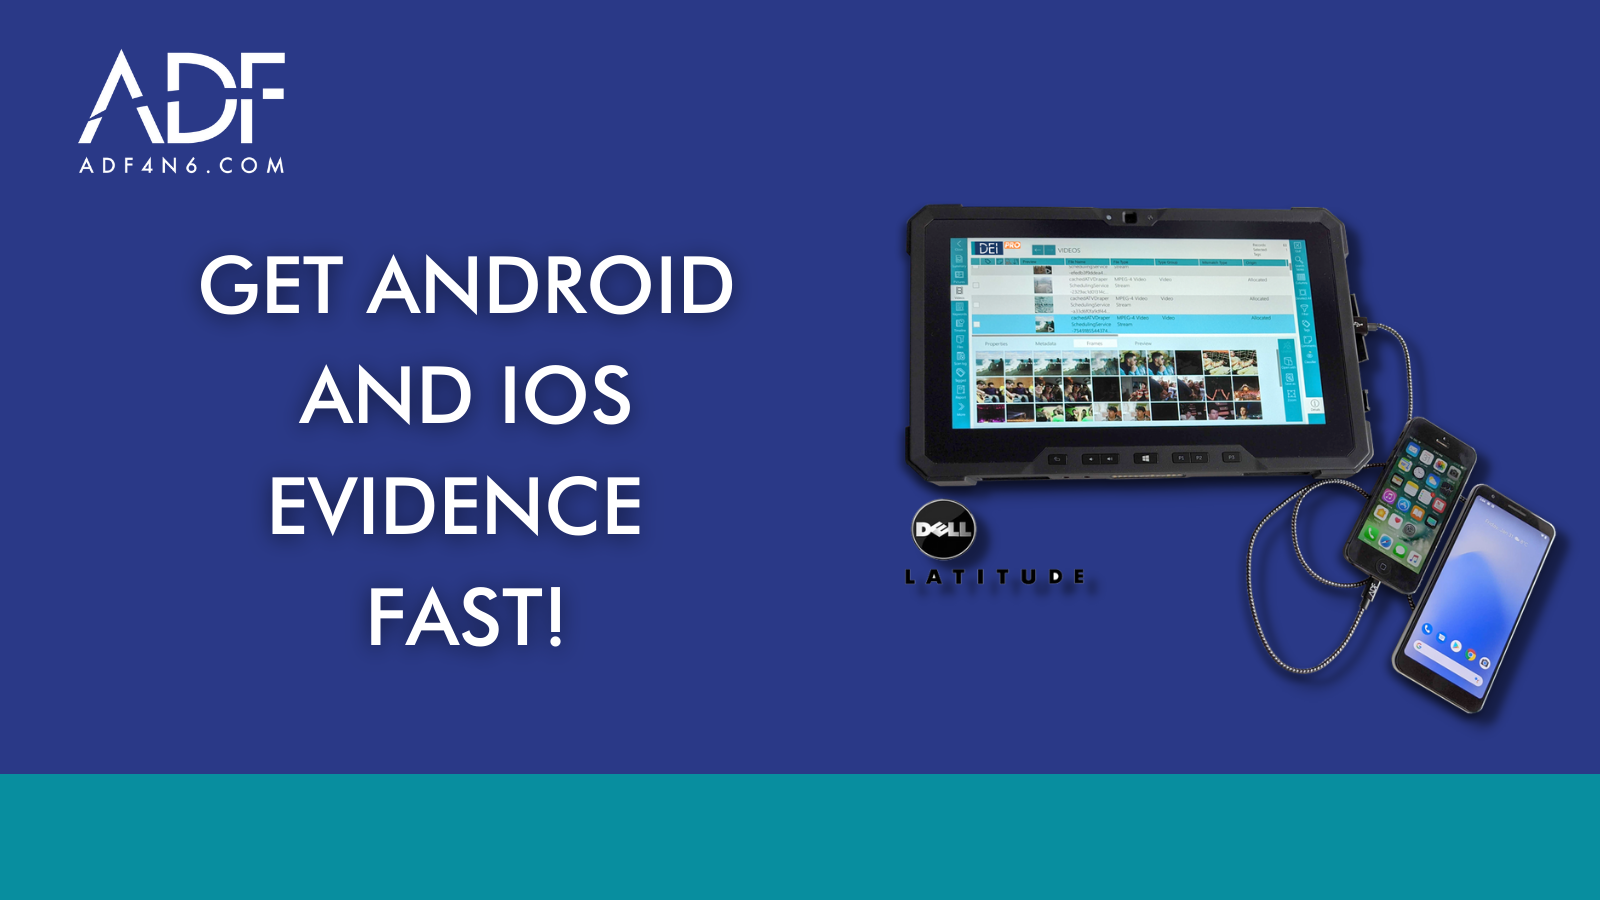 Get Android and iOS Evidence Fast!